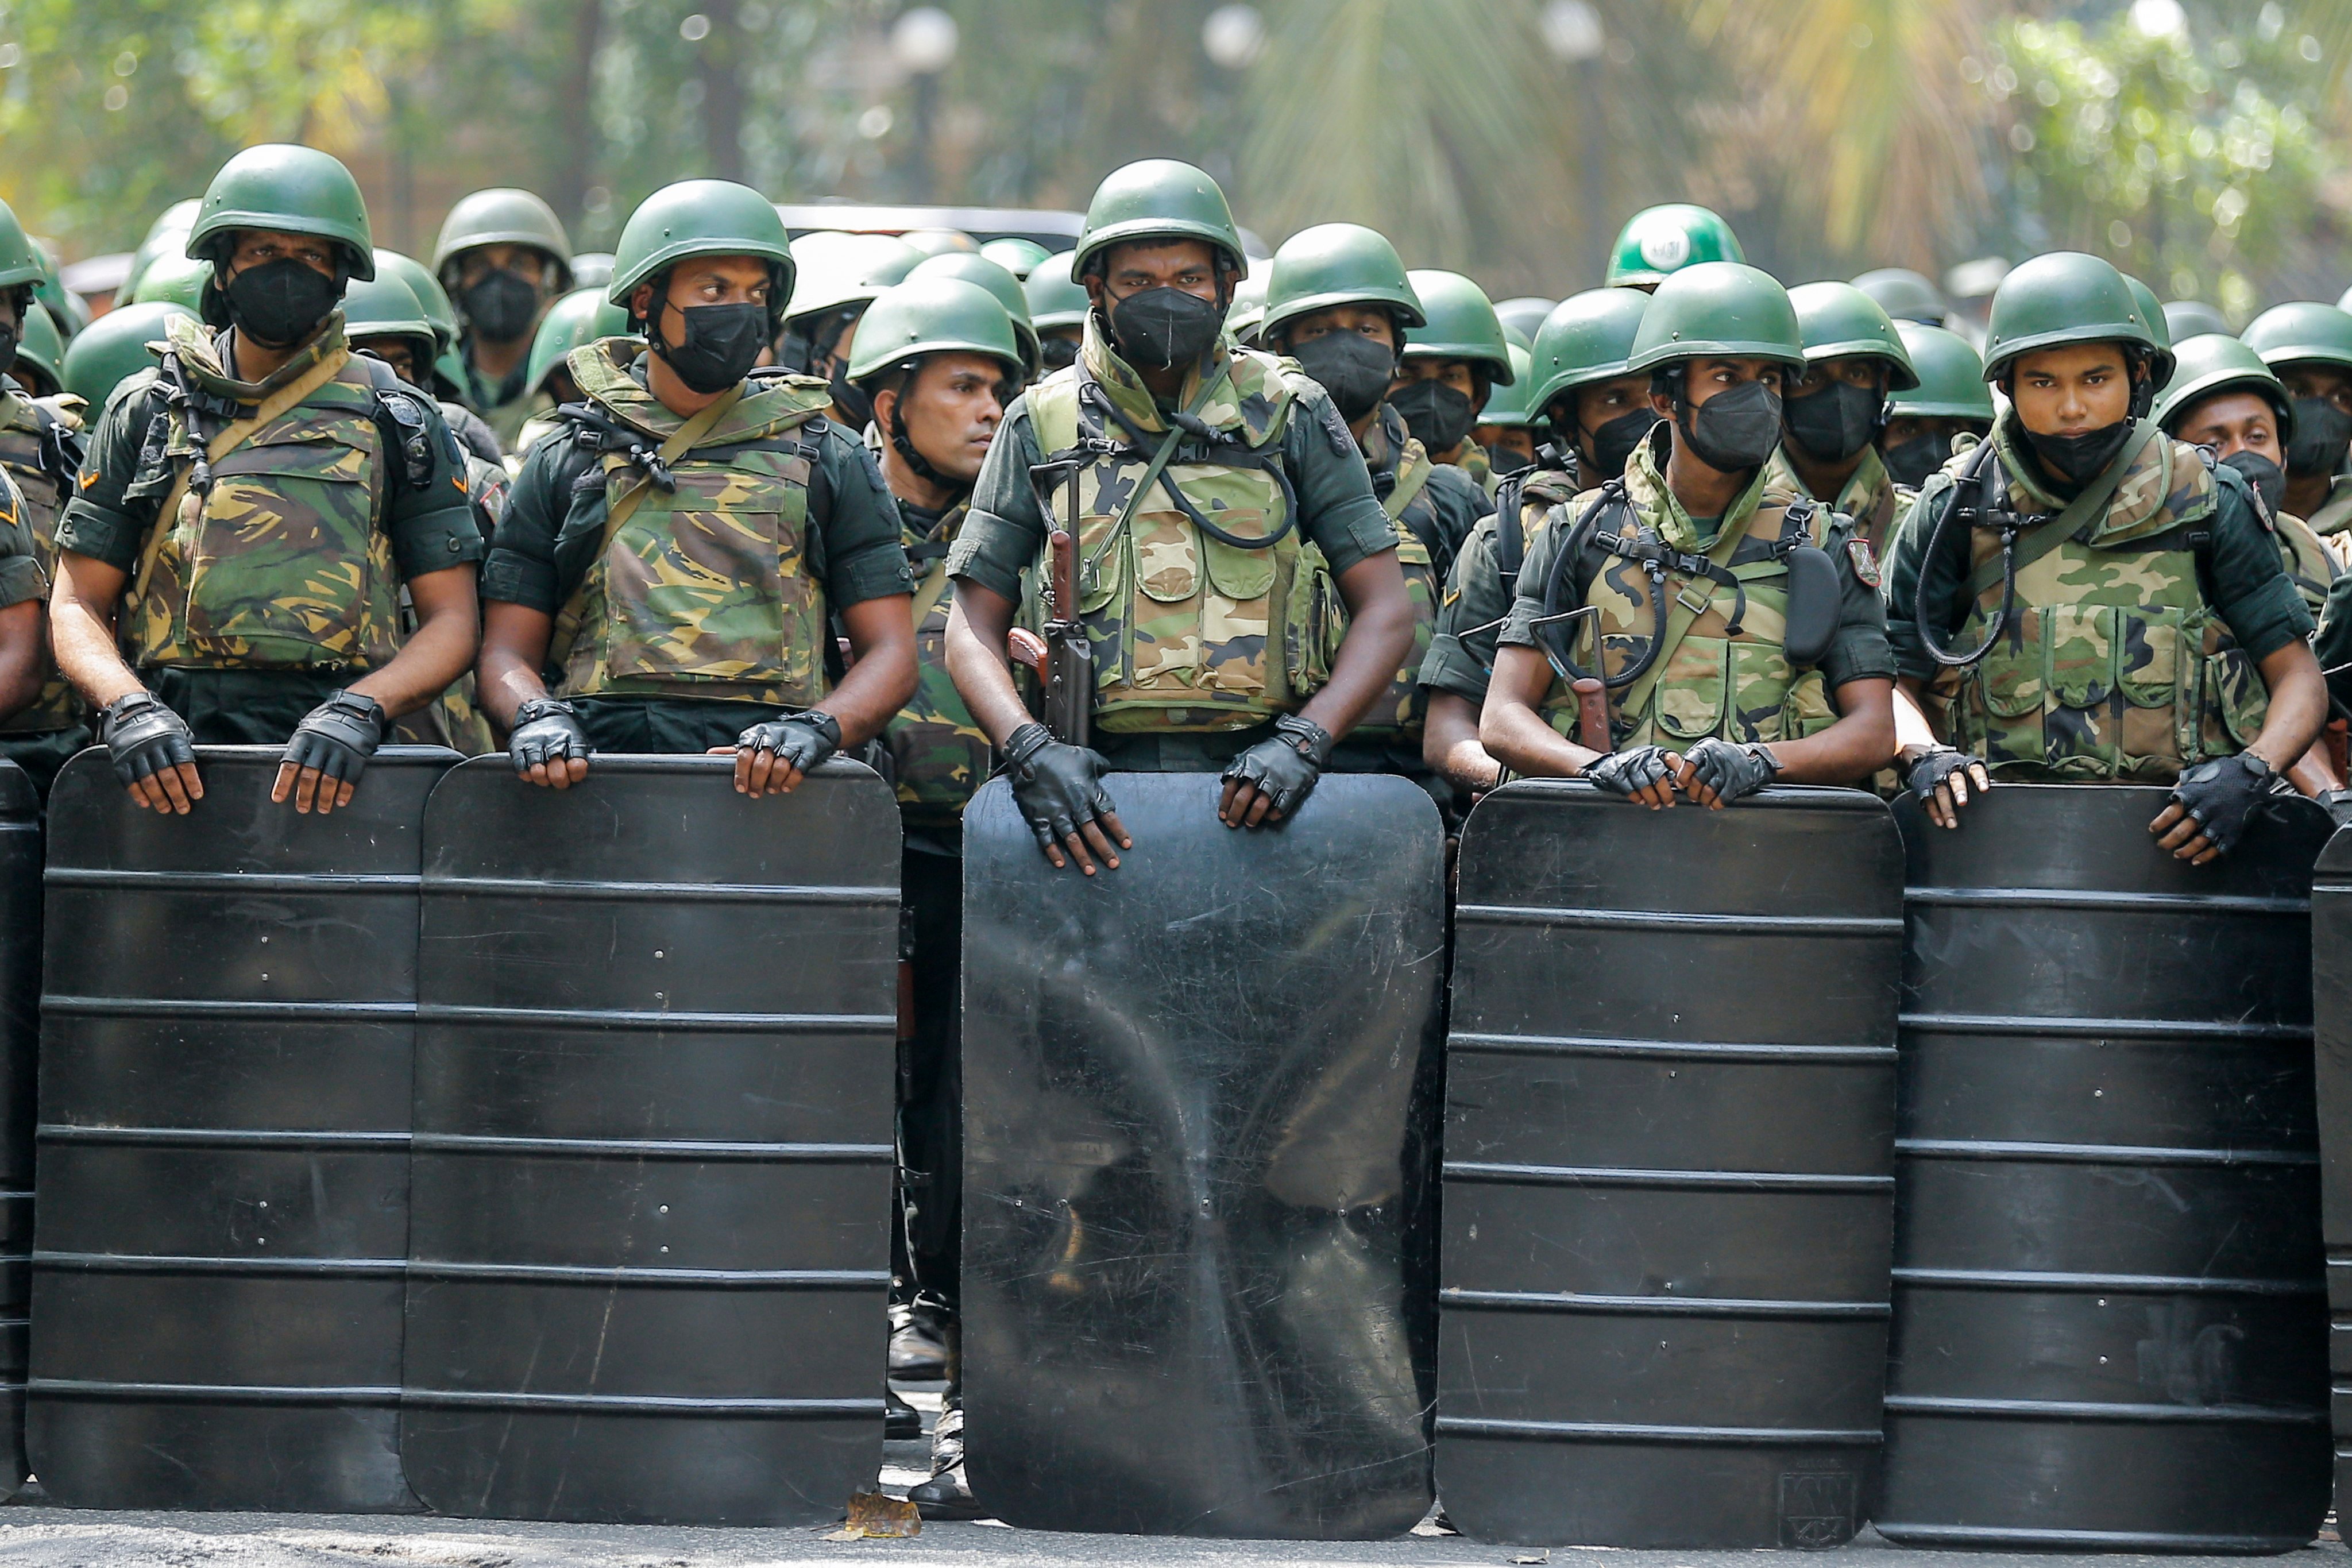 Soldiers block the road during a protest against new tax regulations in Colombo, Sri Lanka, on January 20. Protesters accuse the government of unfairly raising tax rates amid the worst economic crisis in decades. Photo: EPA-EFE